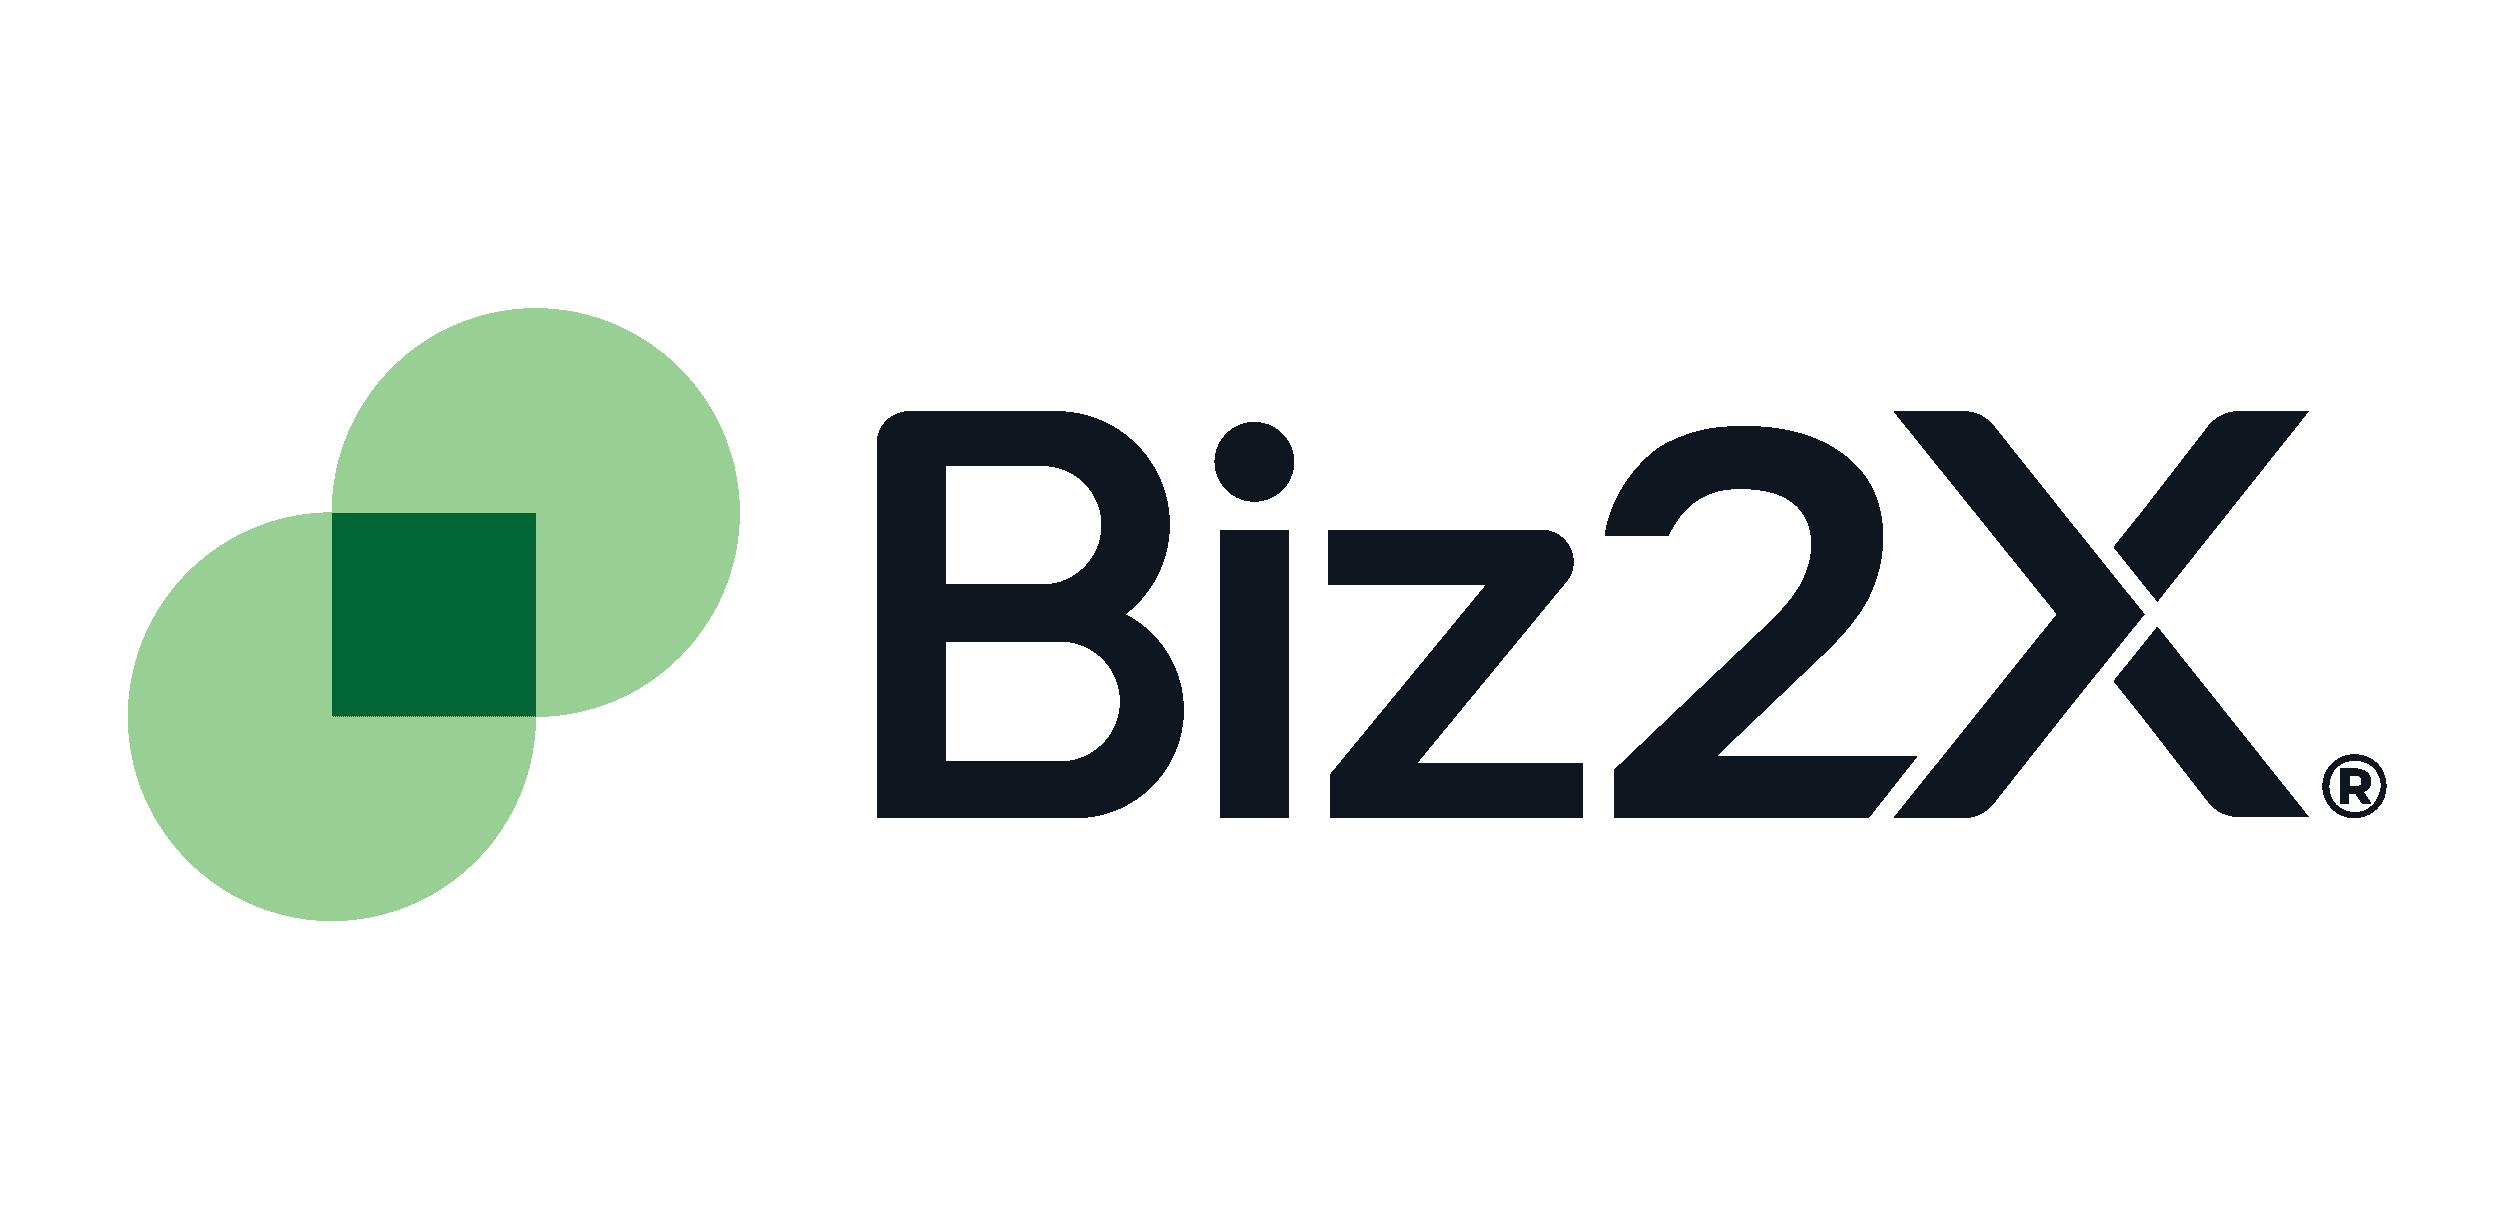 Biz2X Achieves Global Recognition for Exceptional Growth and Innovation in Fintech